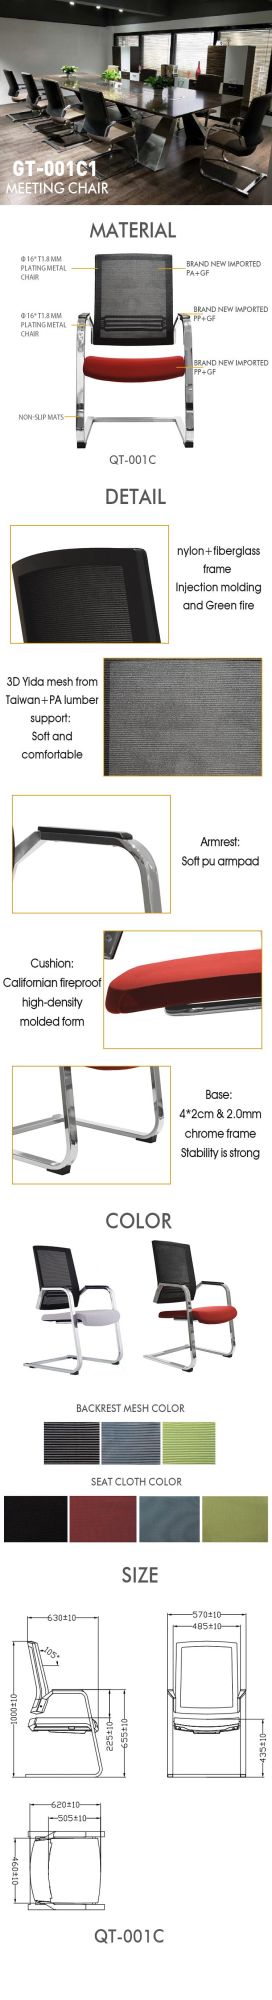 Available Customized Huy Stand Export Packing 74*59*63 Made in China Plastic Chair